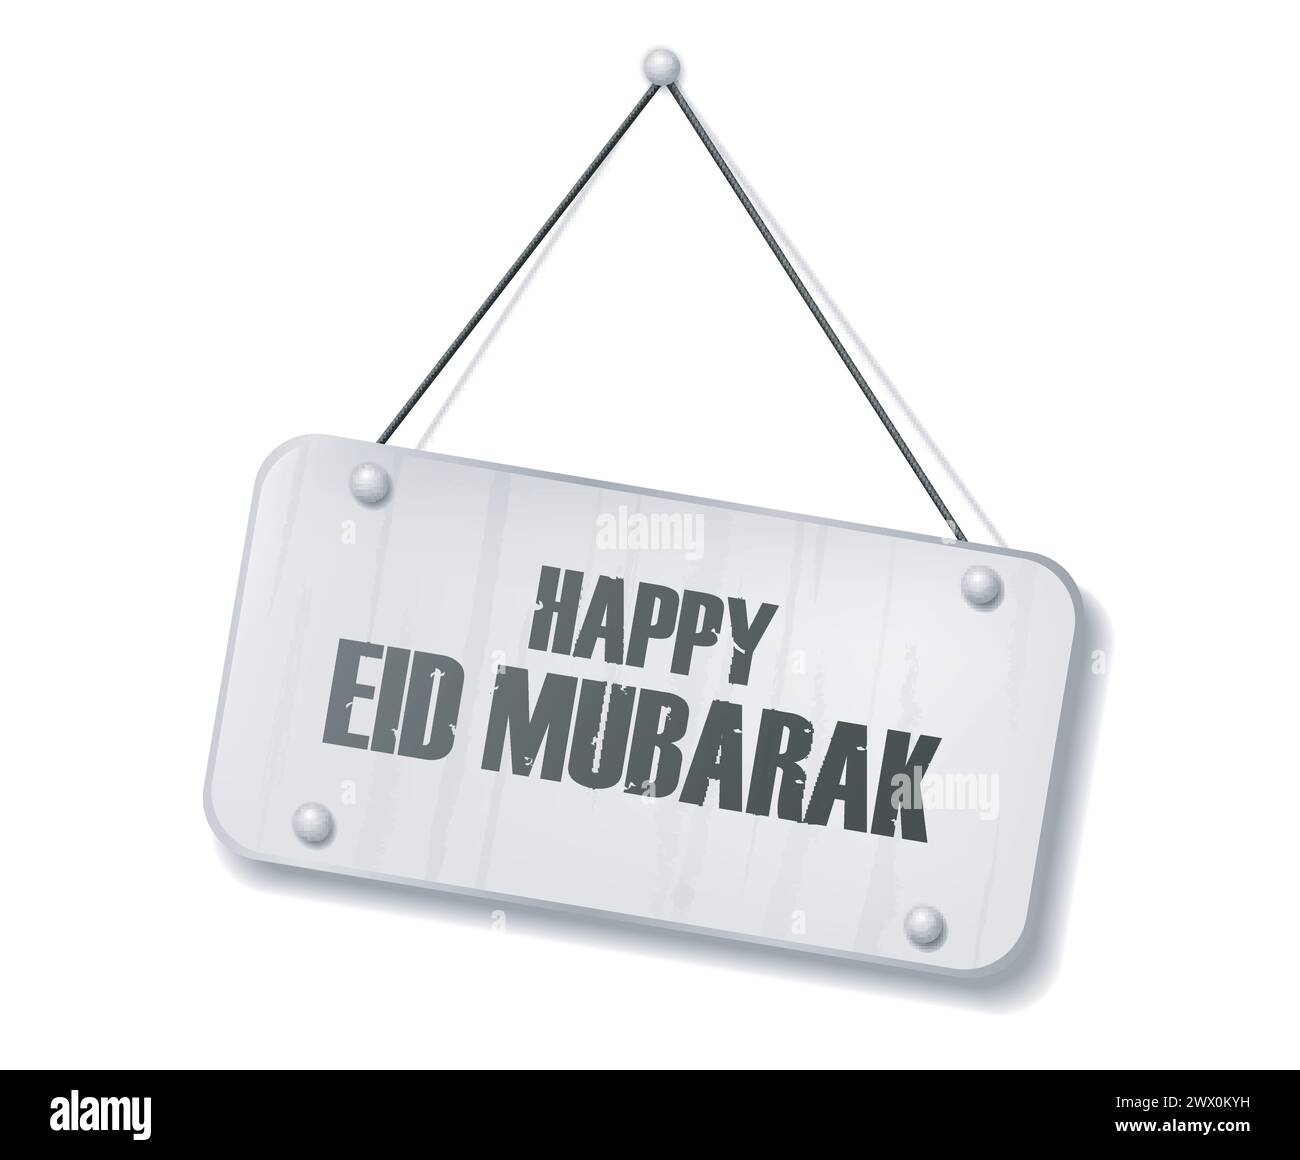 Vintage Old Chrome Sign with Happy Eid Mubarak Text, Vector Illustration Stock Vector